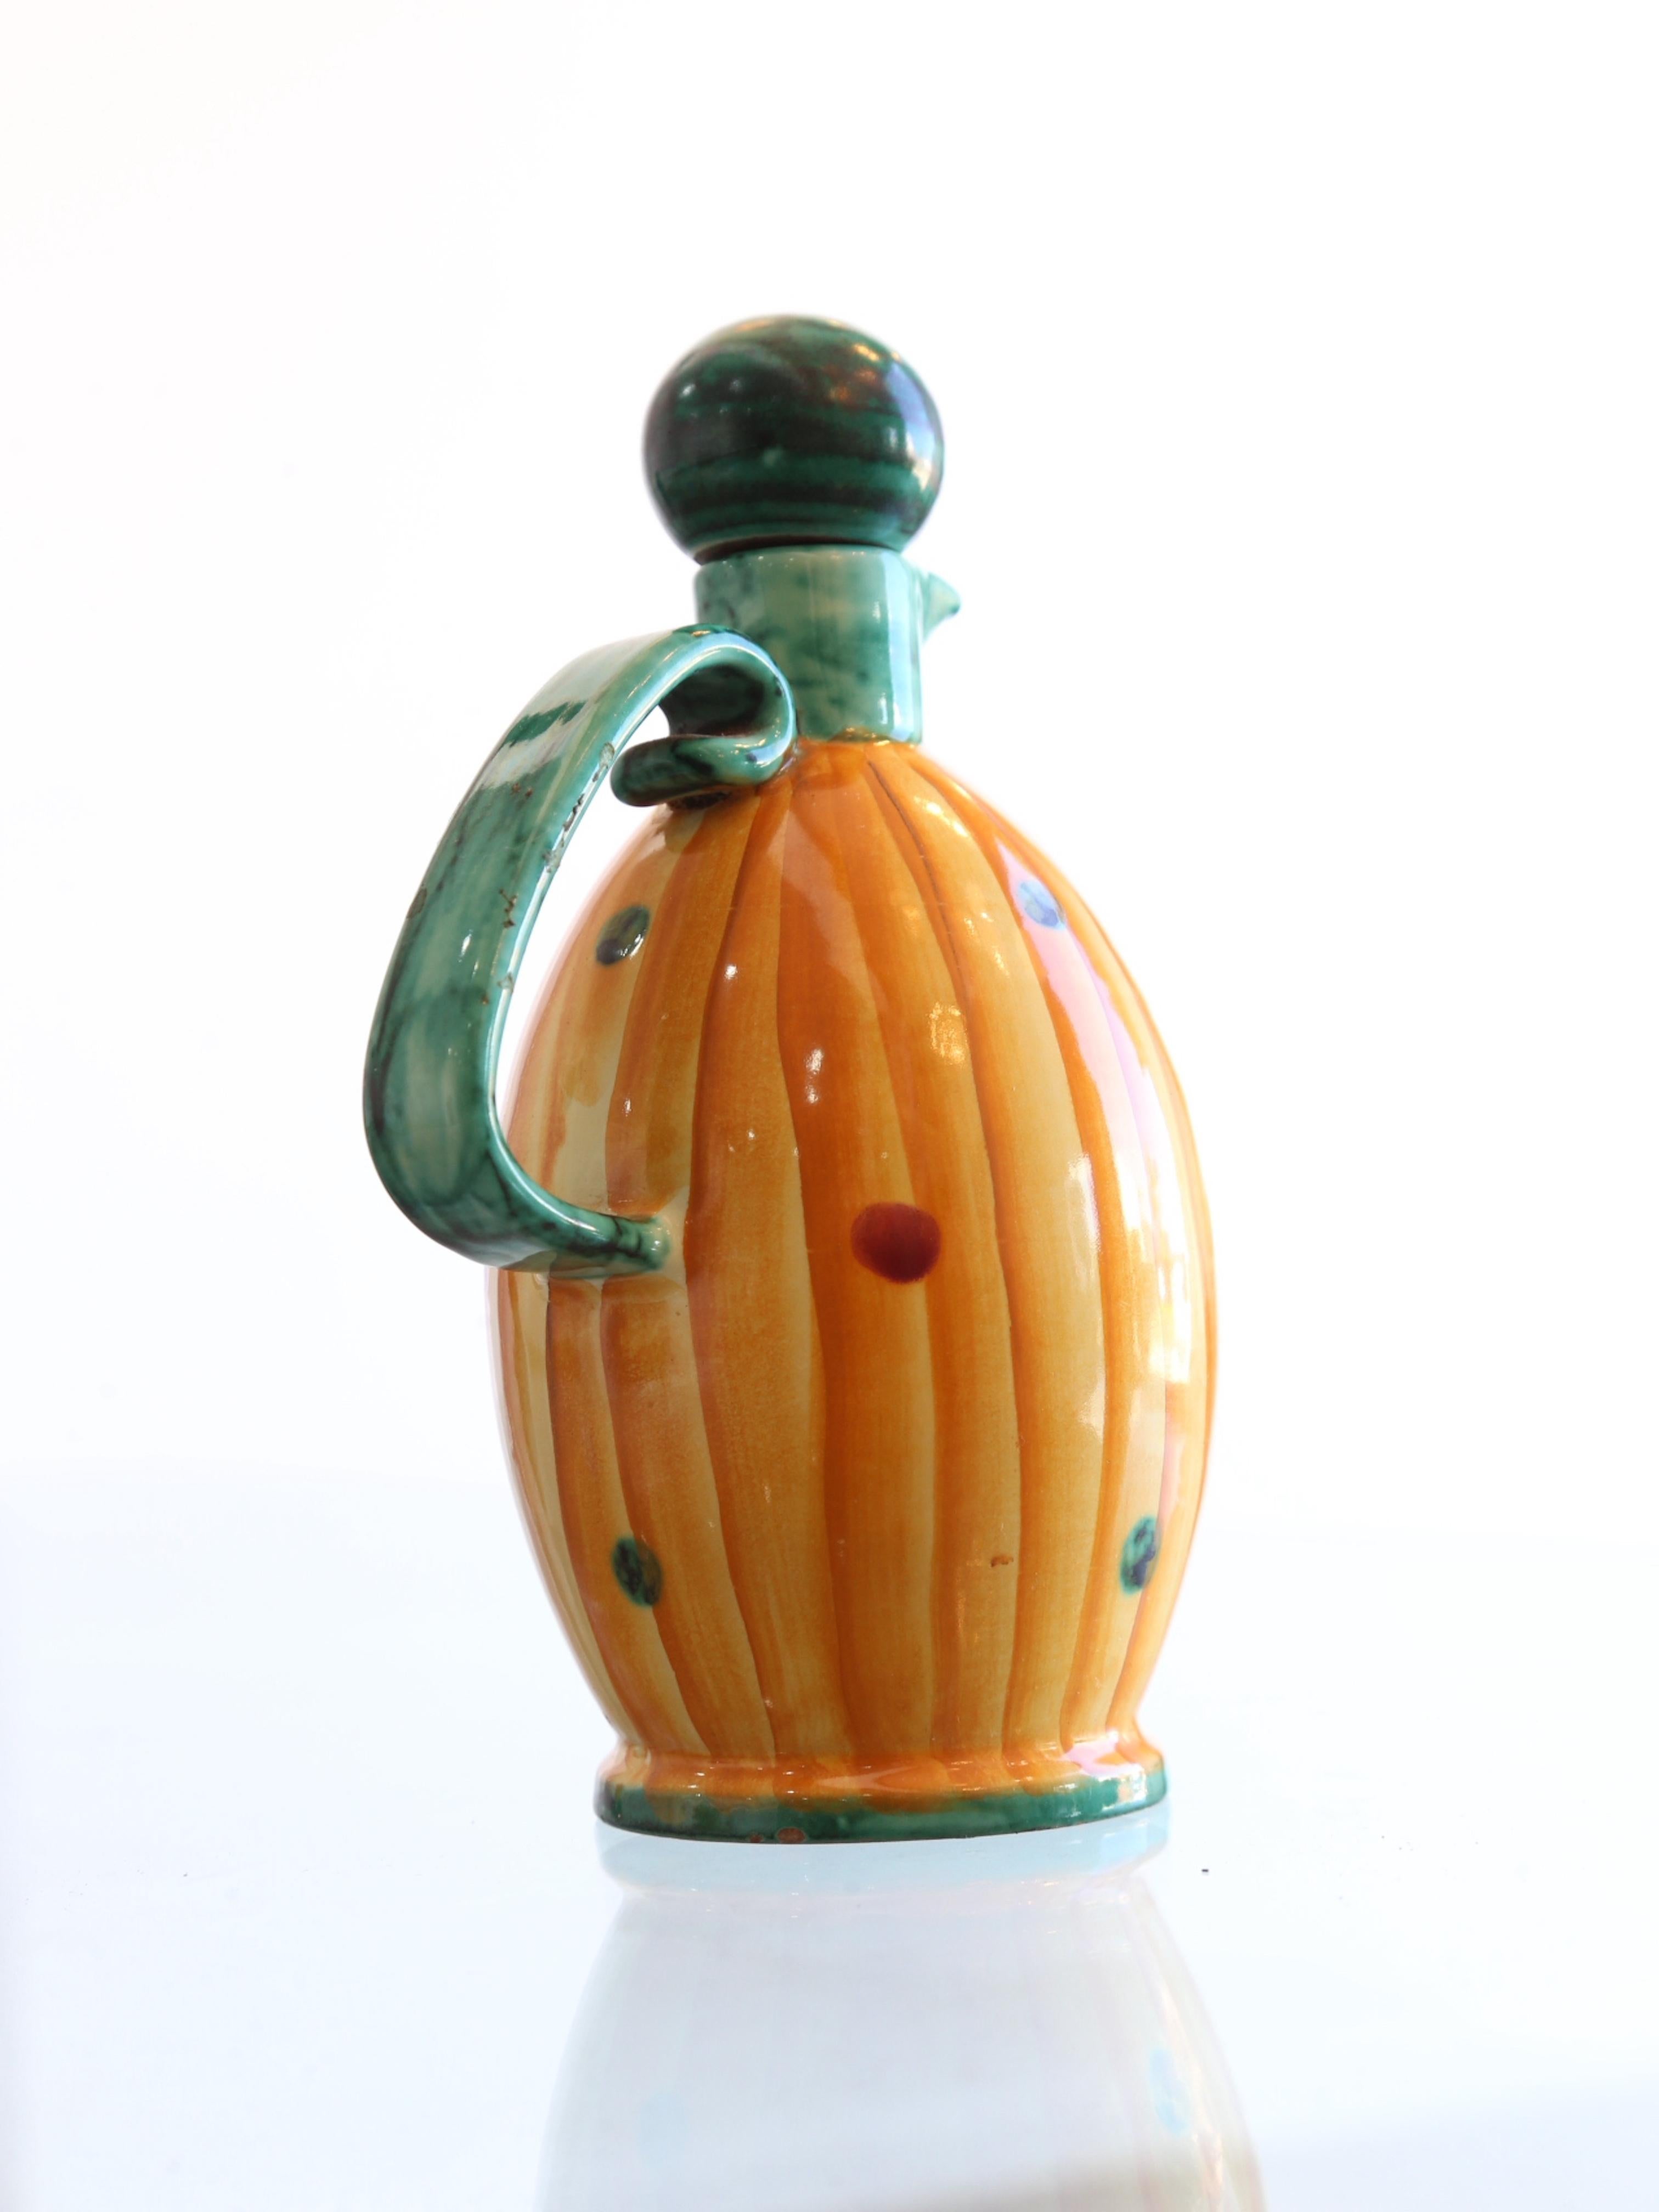 Hand-Crafted Pucci Umbertide Hand Painted Olive Oil Ceramic Bottle, 1950s For Sale